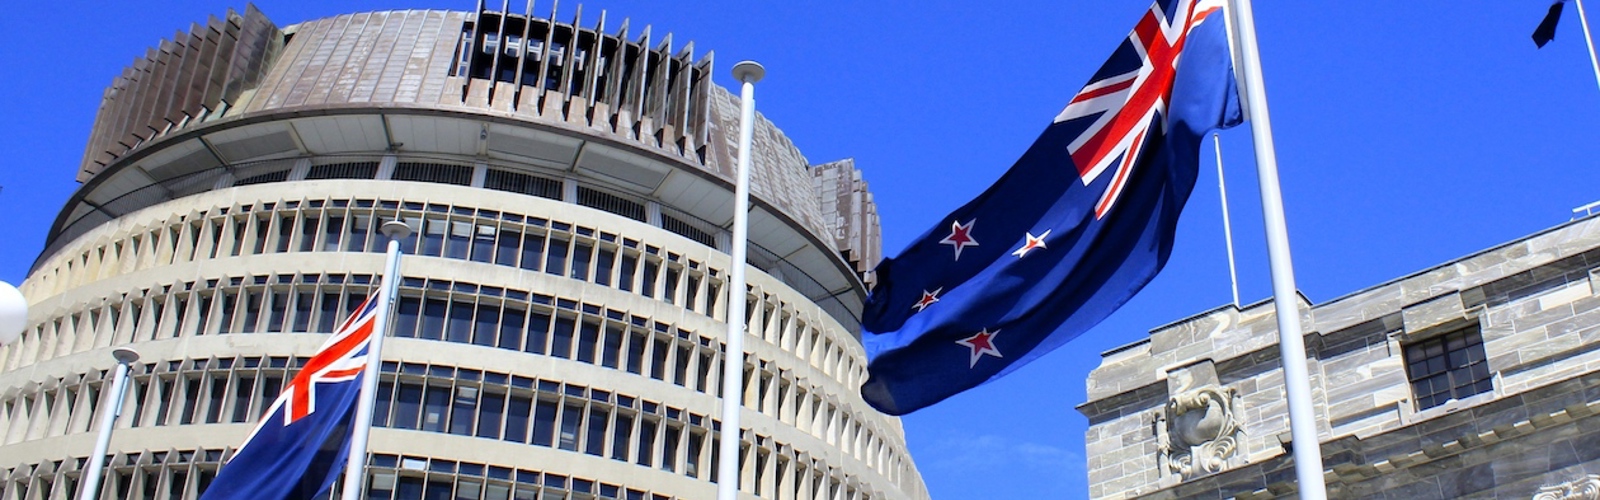 The New Zealand parliament buildings